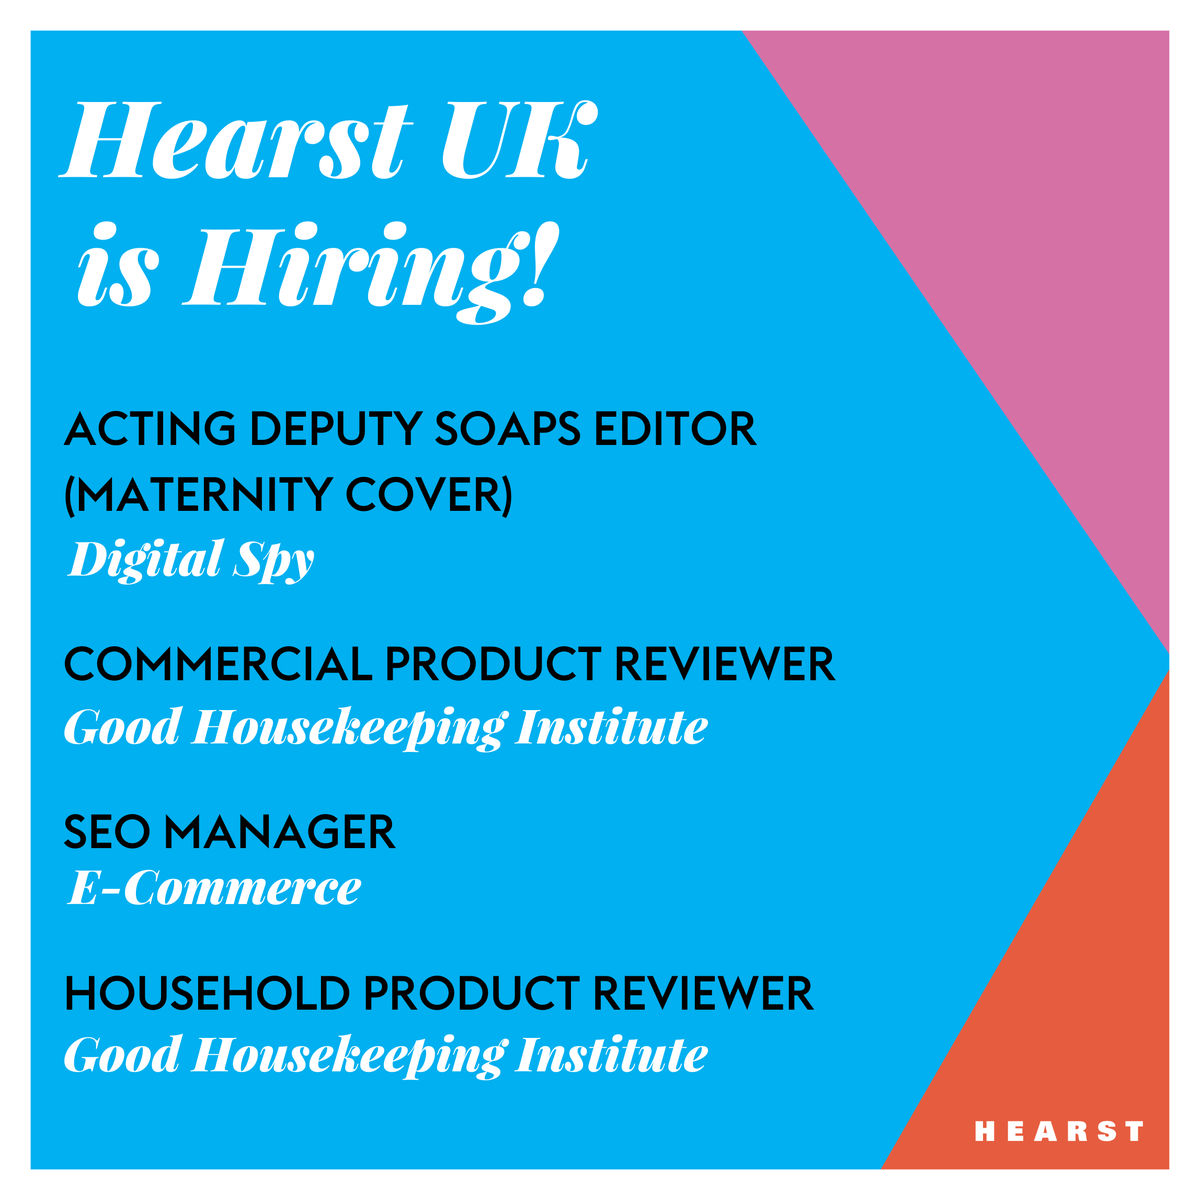 ✍️ Write the next chapter of your career story at Hearst UK - we’re #hiring, and if you're passionate, talented and share our vision, we'd love to hear from you. Have a look at all of our job openings here: bit.ly/3TOPRIM #werehiring #hearstuk